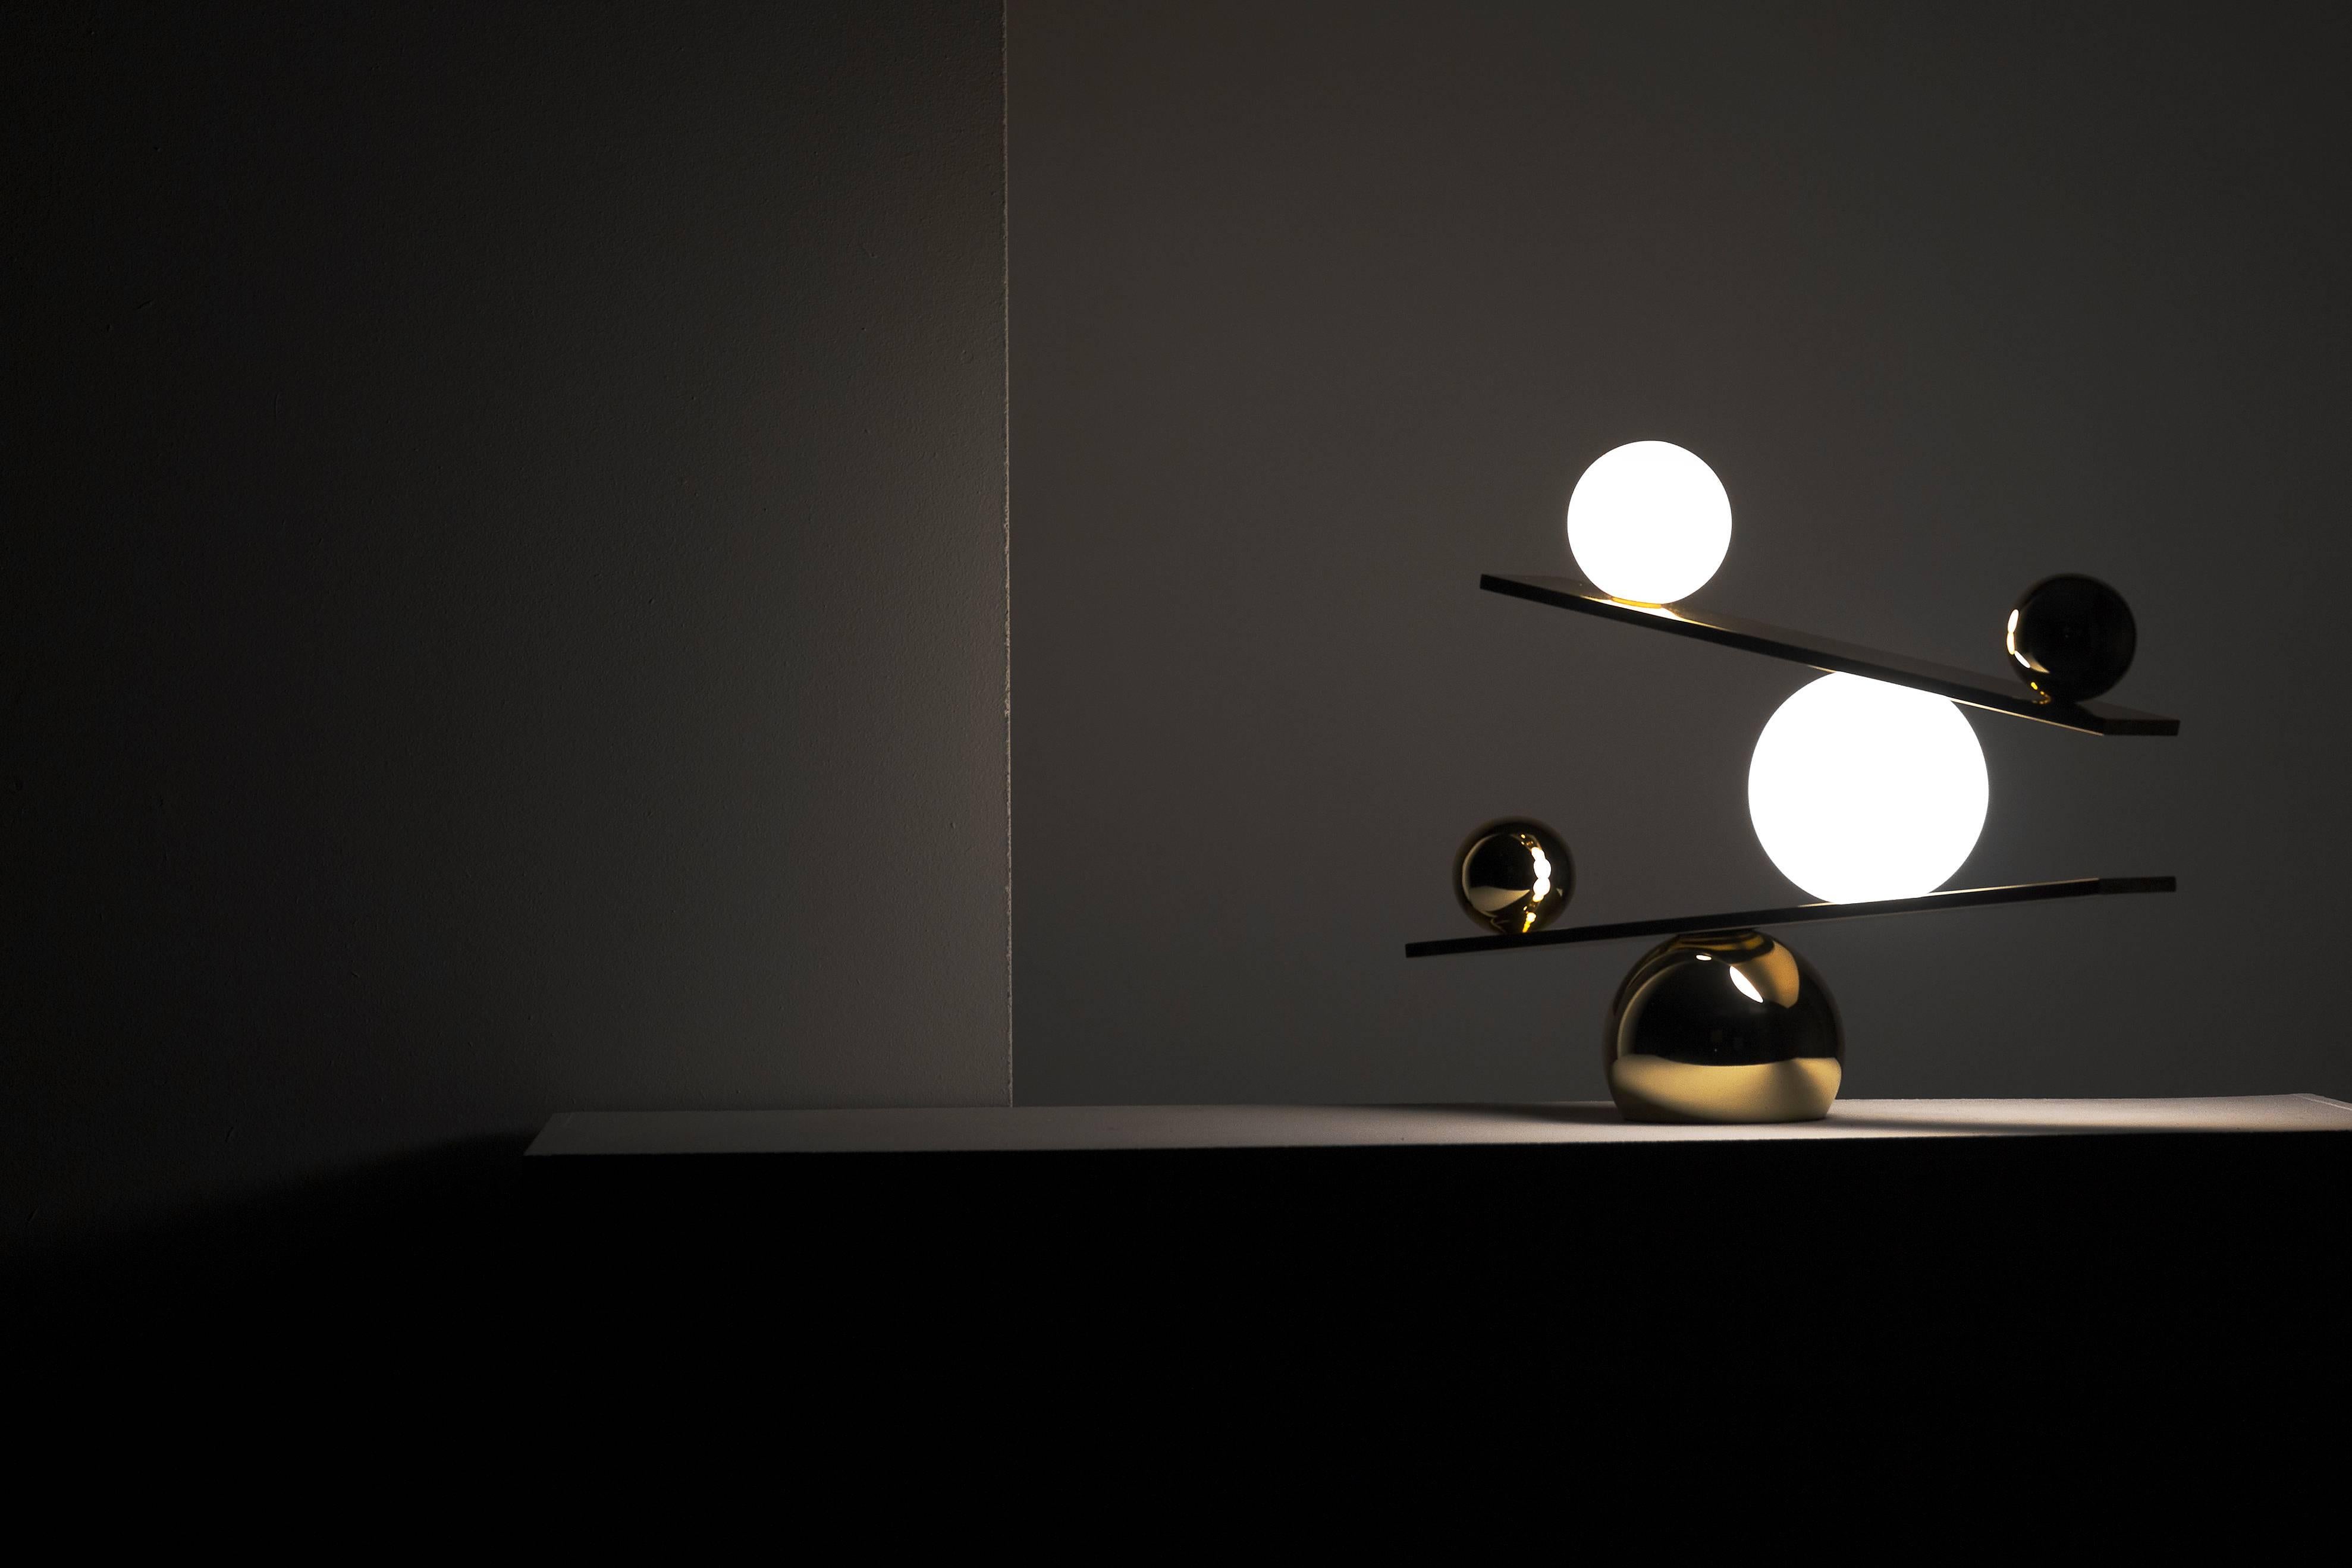 The Balance table lamp is Victor Castanera first product for Oblure. The fixed impossible position of the orbs is an expression of the fragility of existents. All entities move and nothing remain still. Balance is a play with the concept of time –